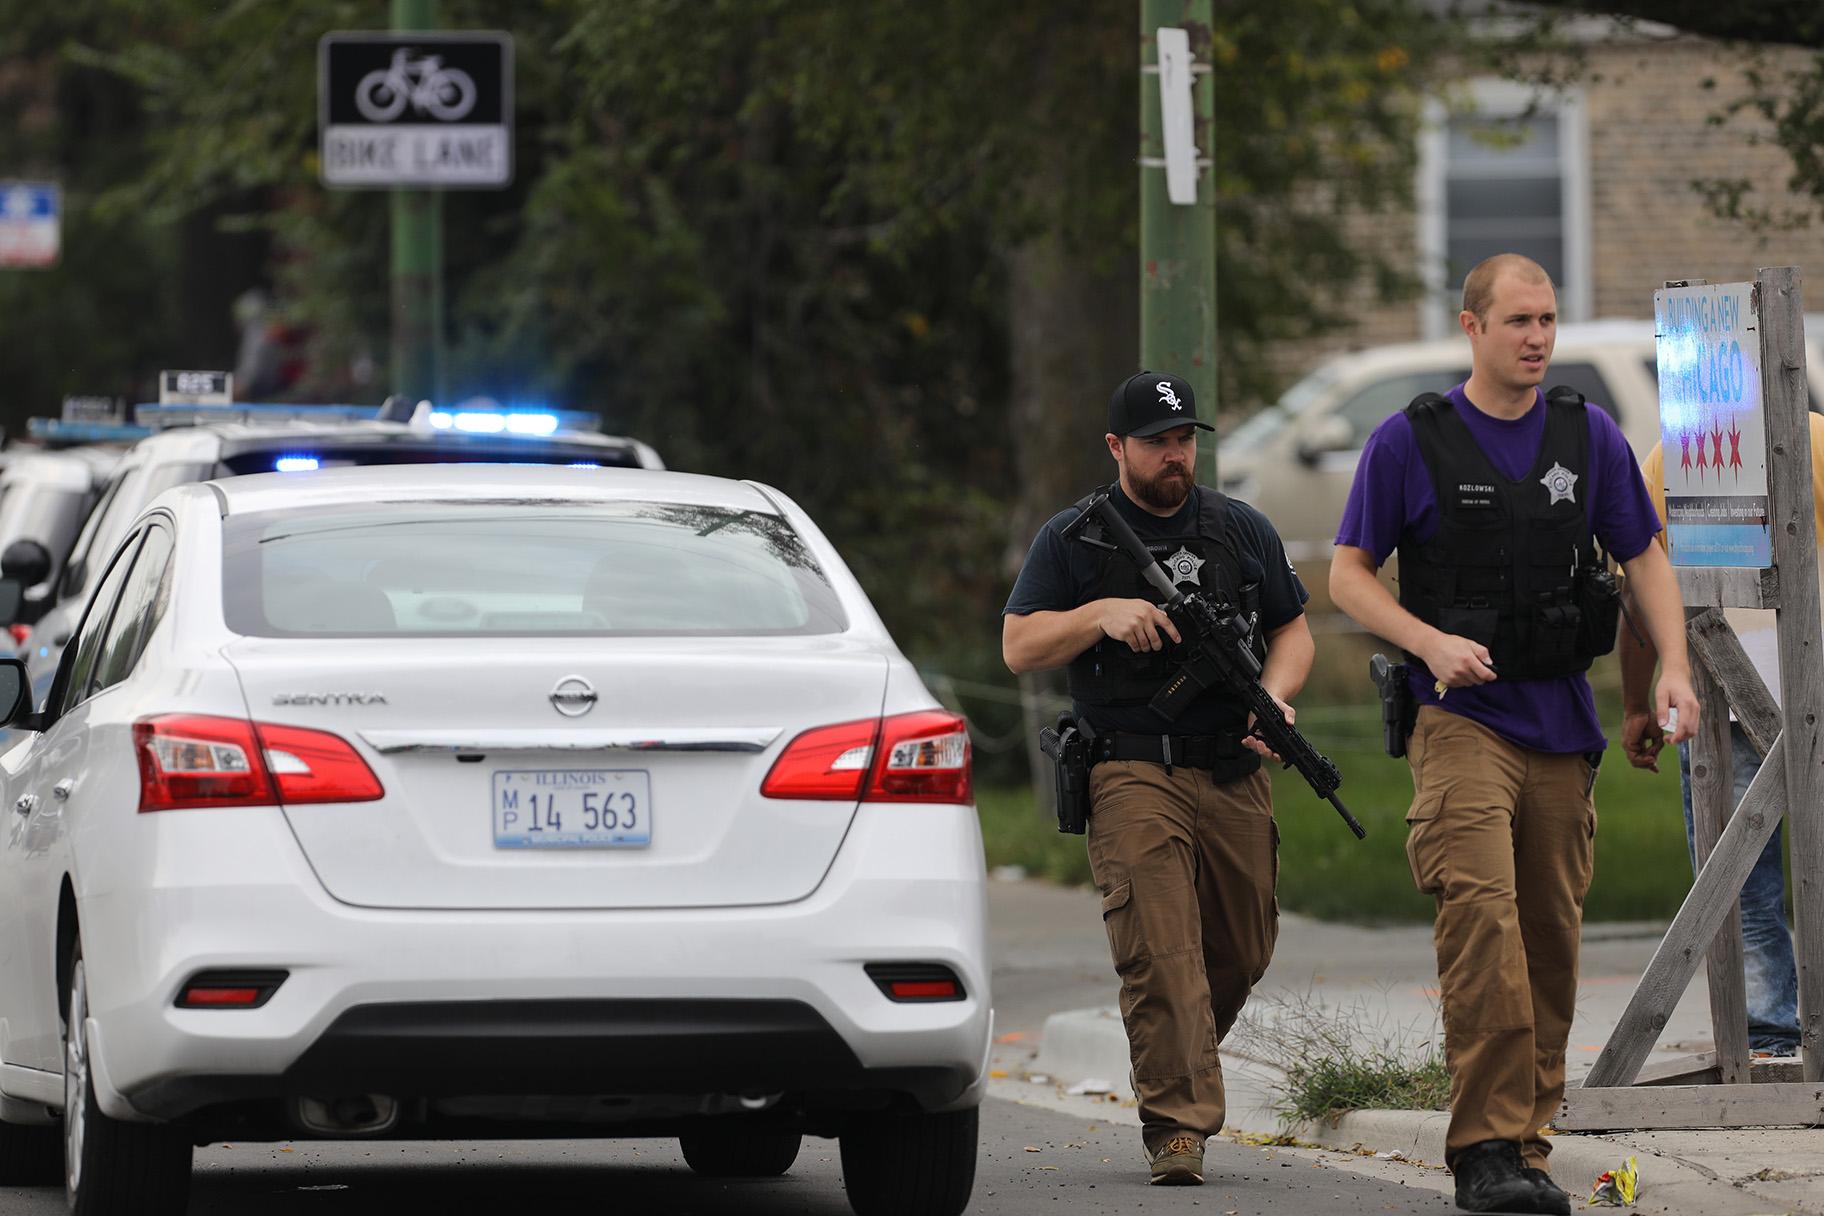 Police search for a suspect that shot a Chicago Police Department officer, near 63rd and Damen, Saturday, Sept. 21, 2019. The shooting happened around 8:40 a.m. (Abel Uribe / Chicago Tribune via AP)